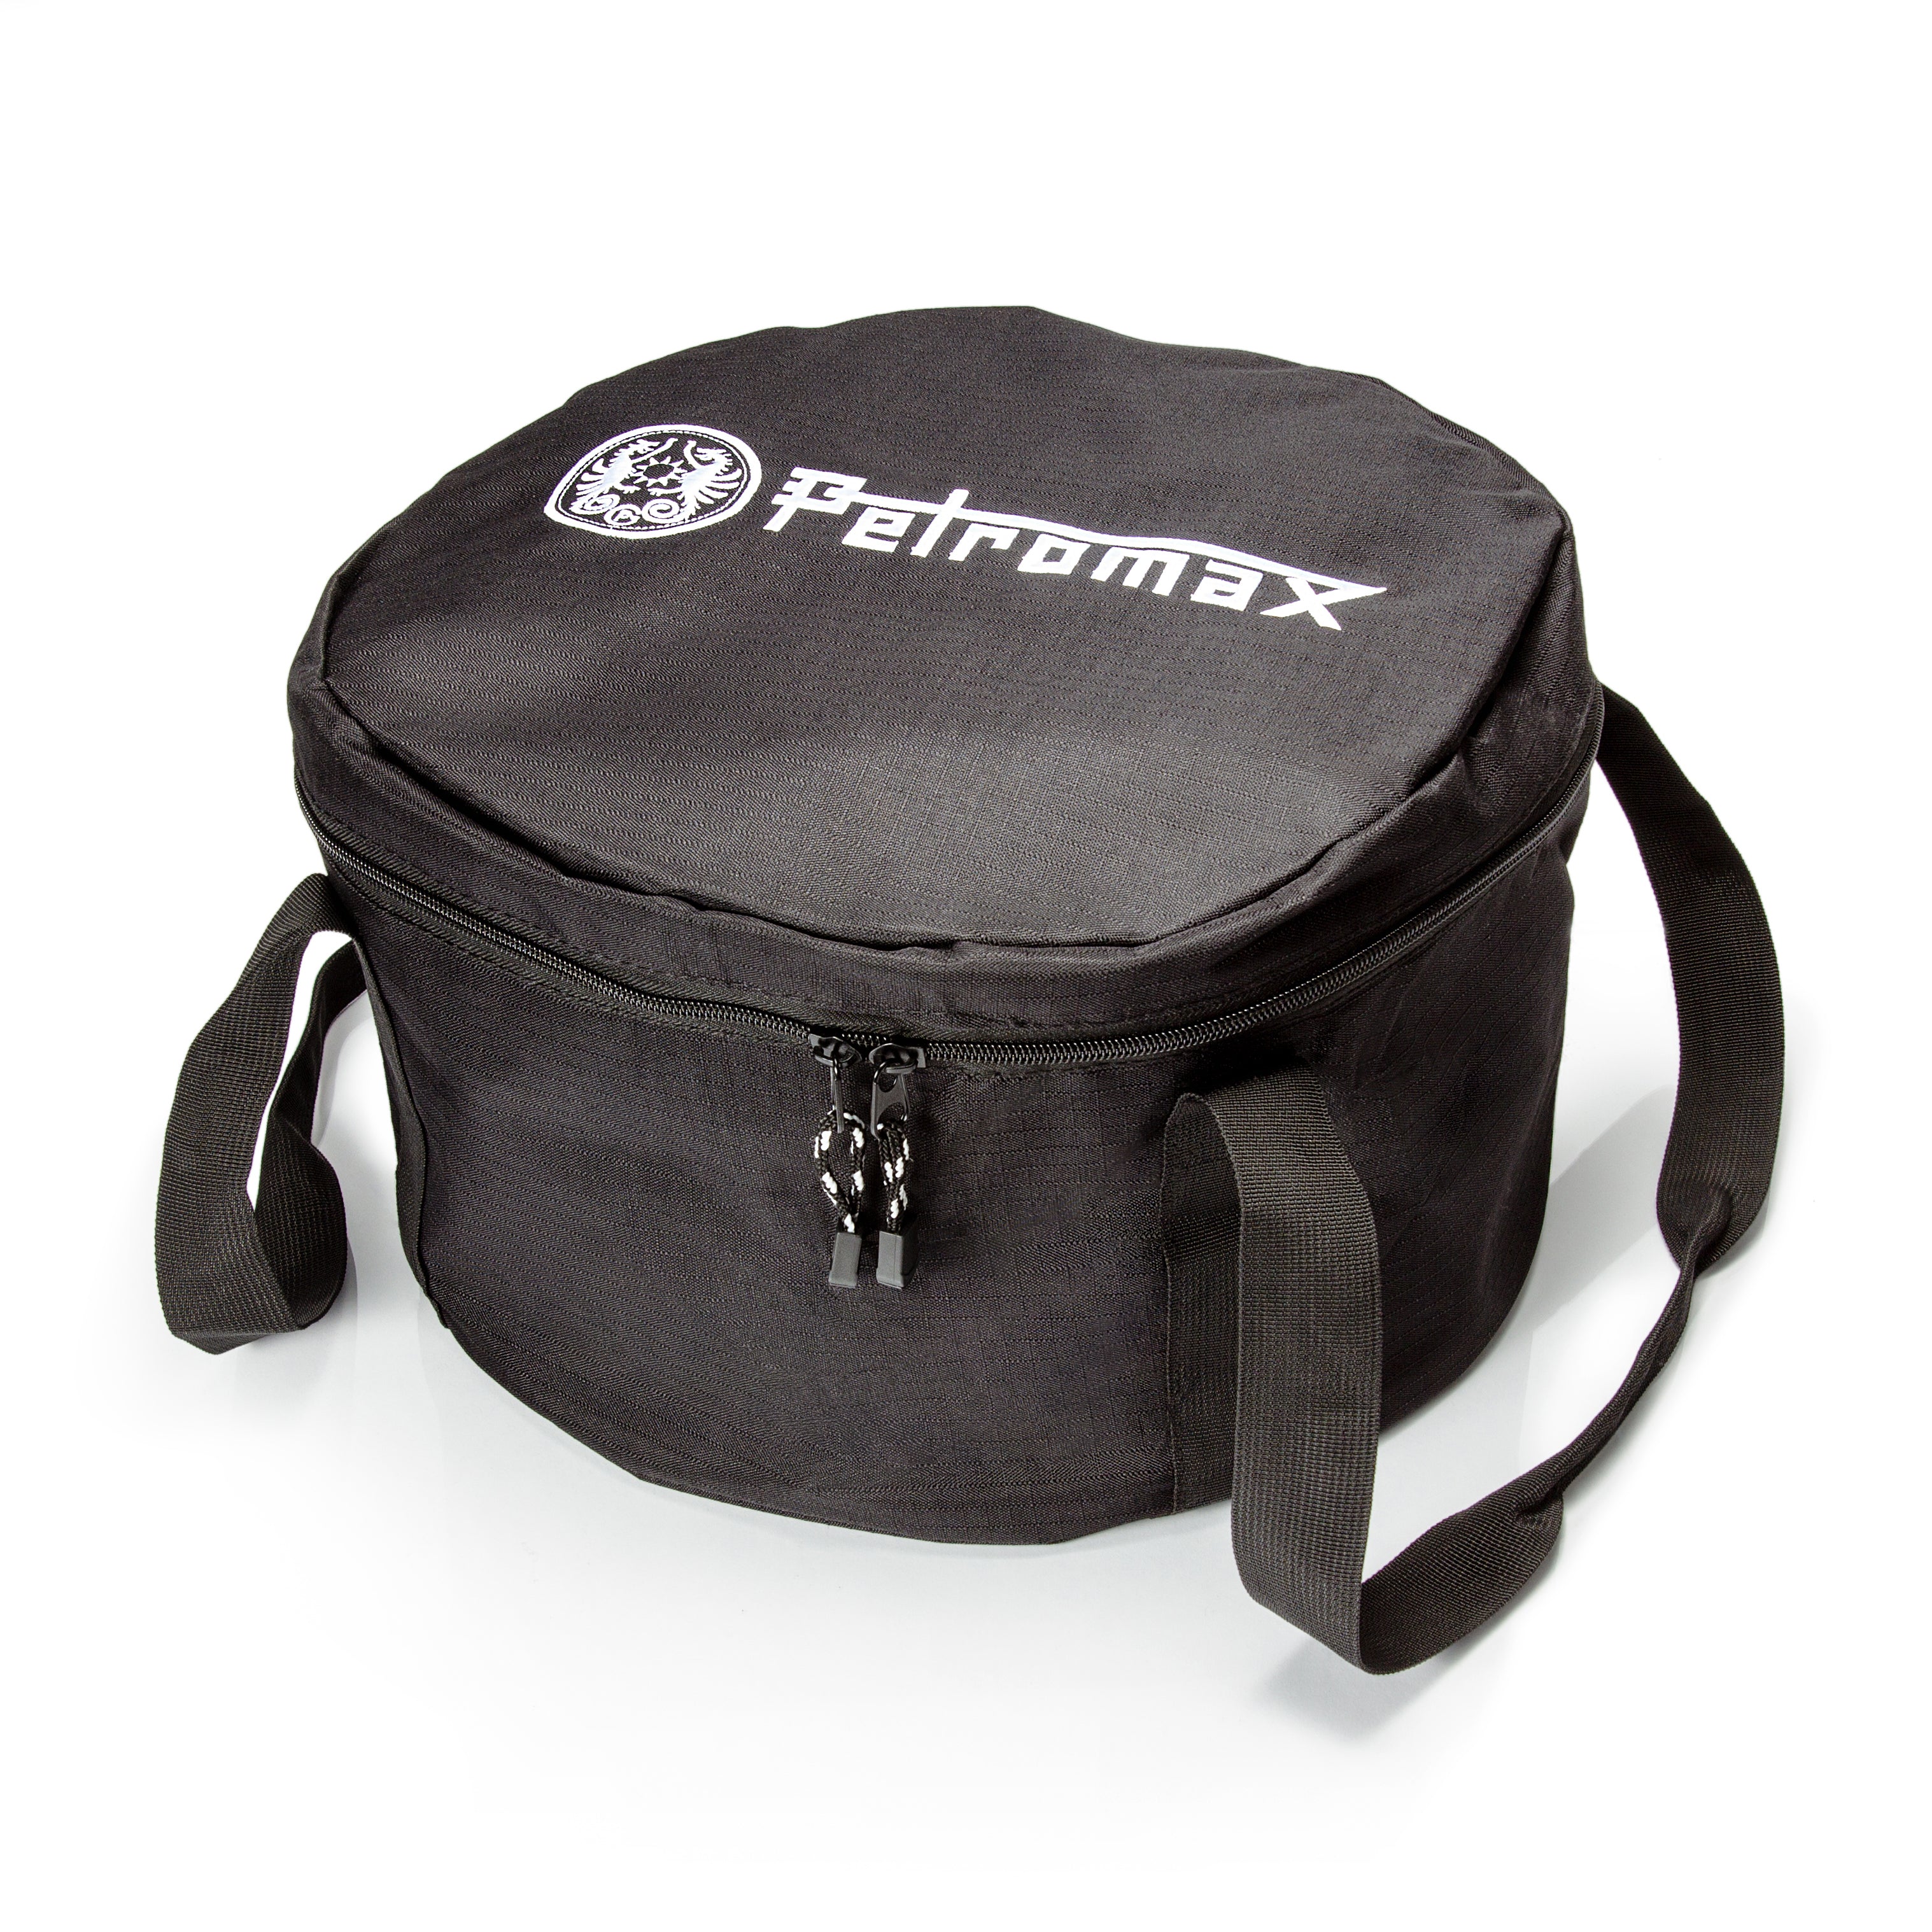 Transport Bag for Dutch Oven ft6 and ft9 - Petromax - ft-ta-m